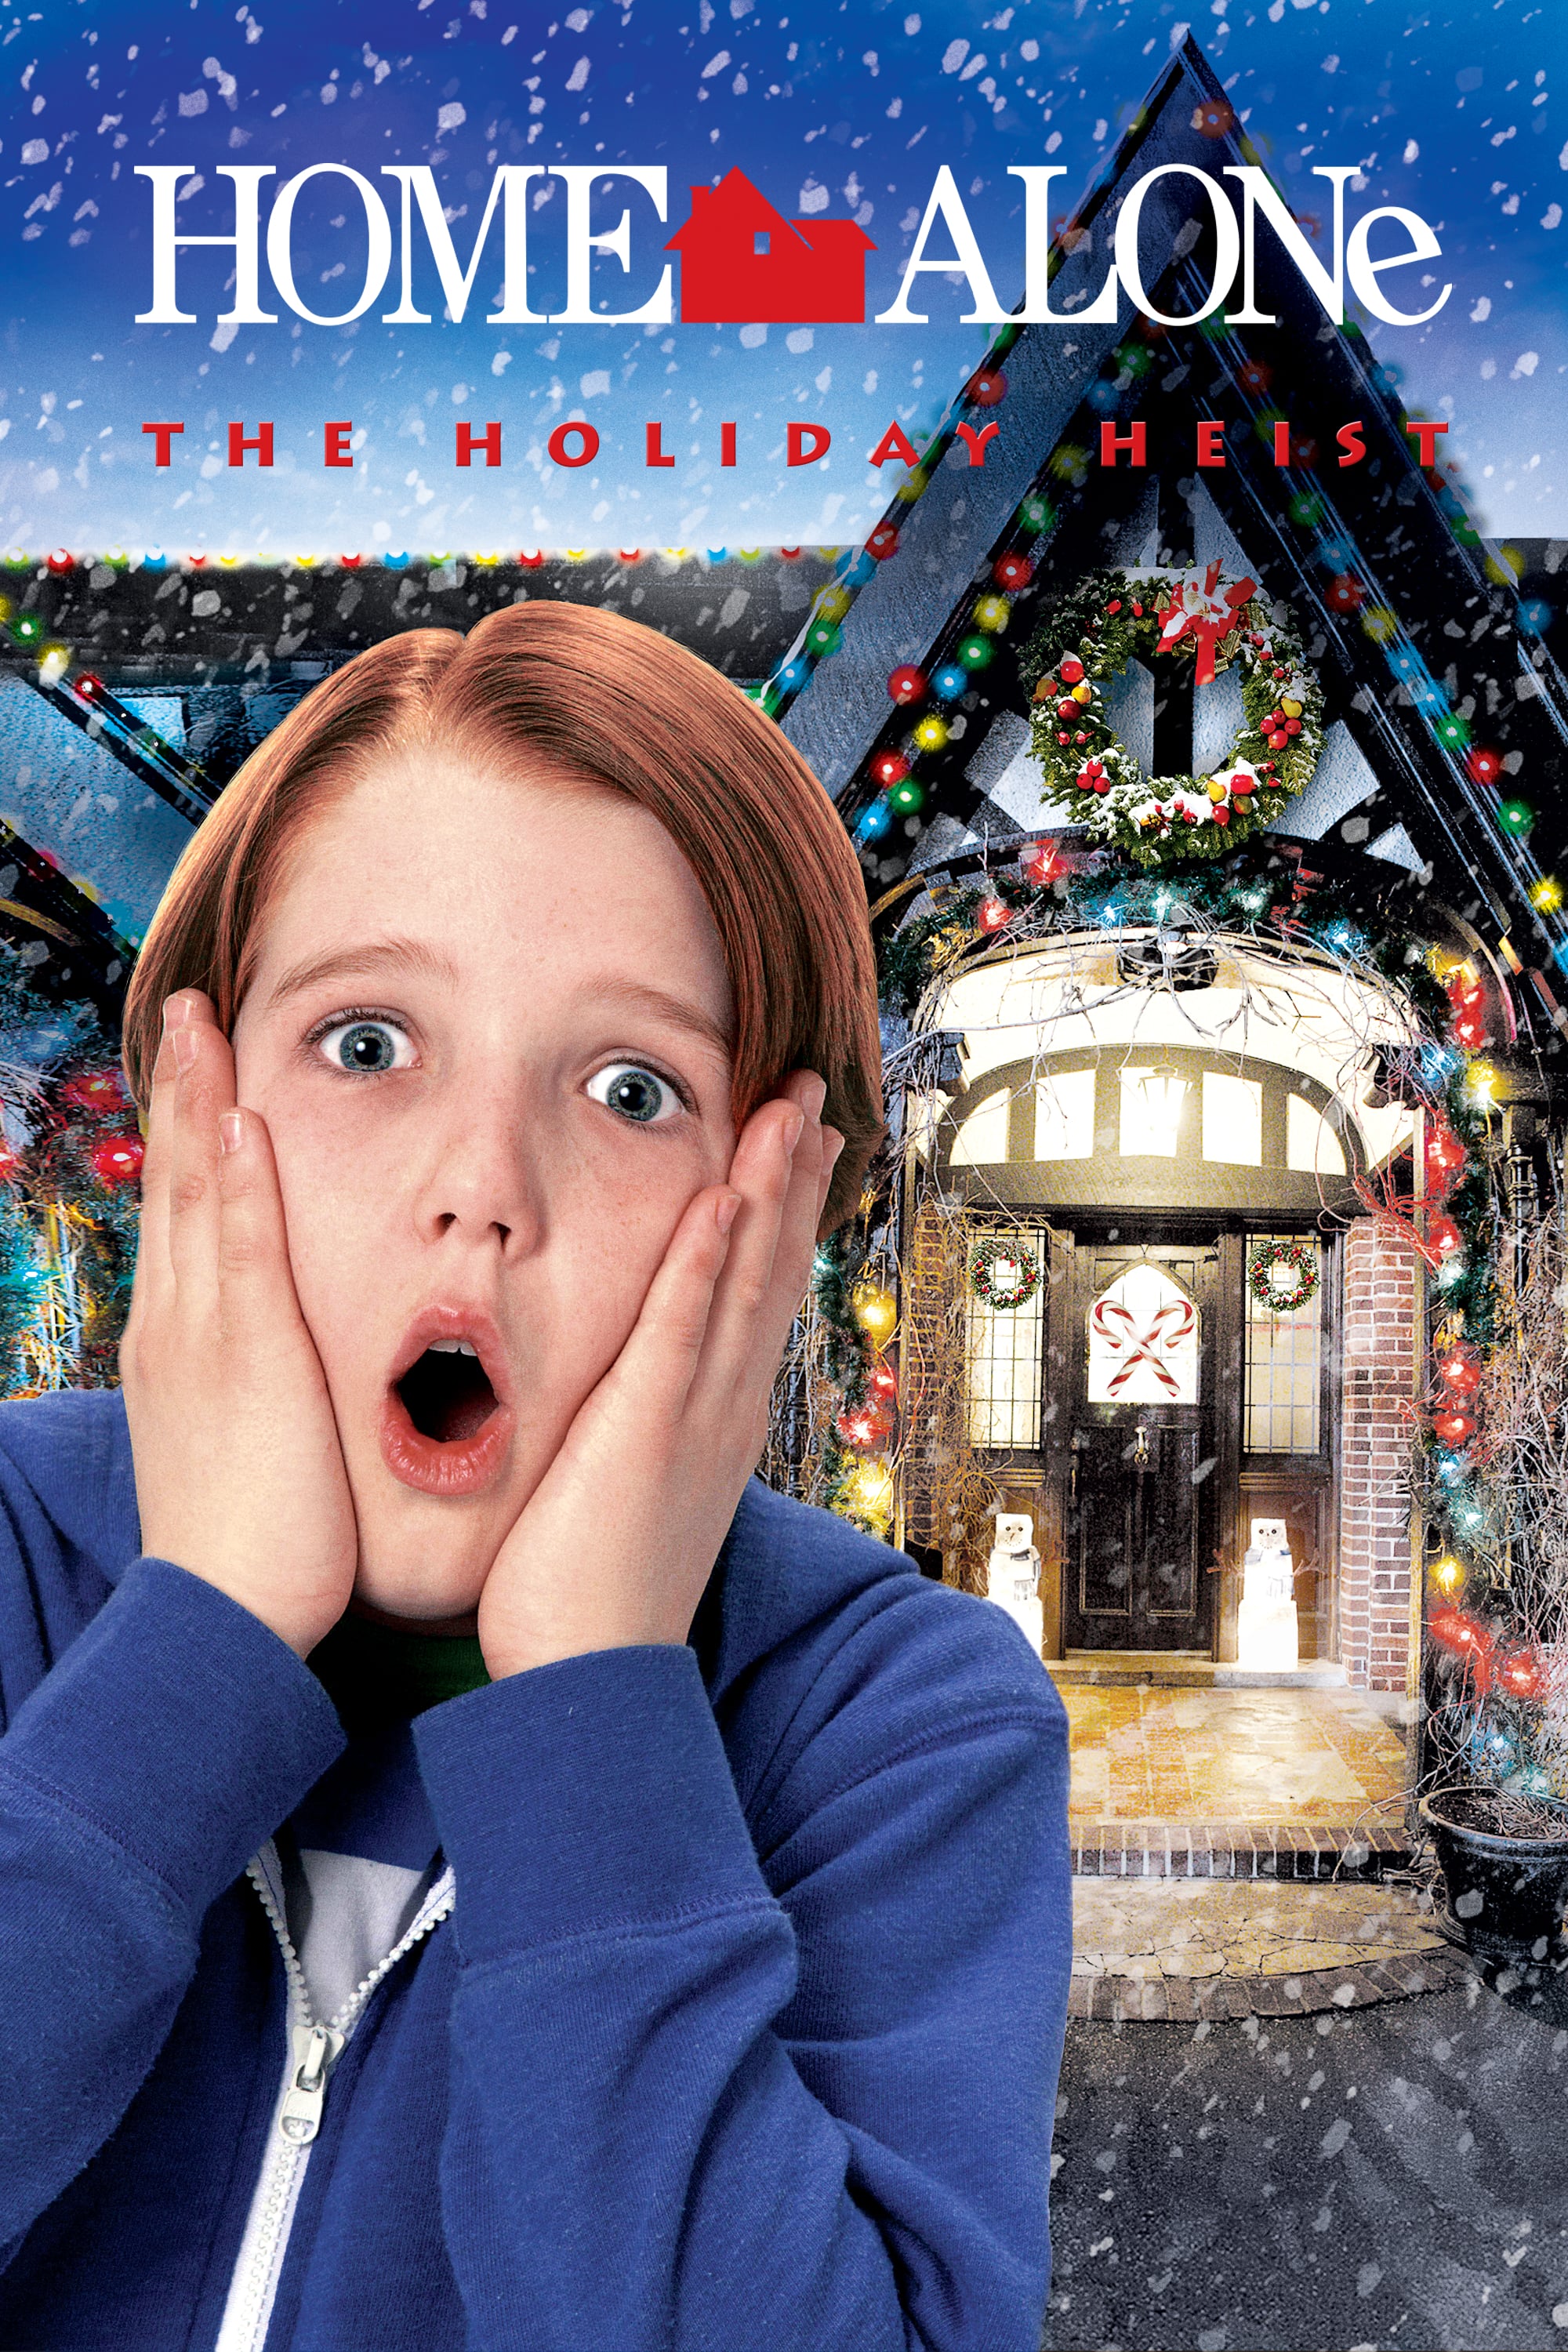 home alone 4 streaming free